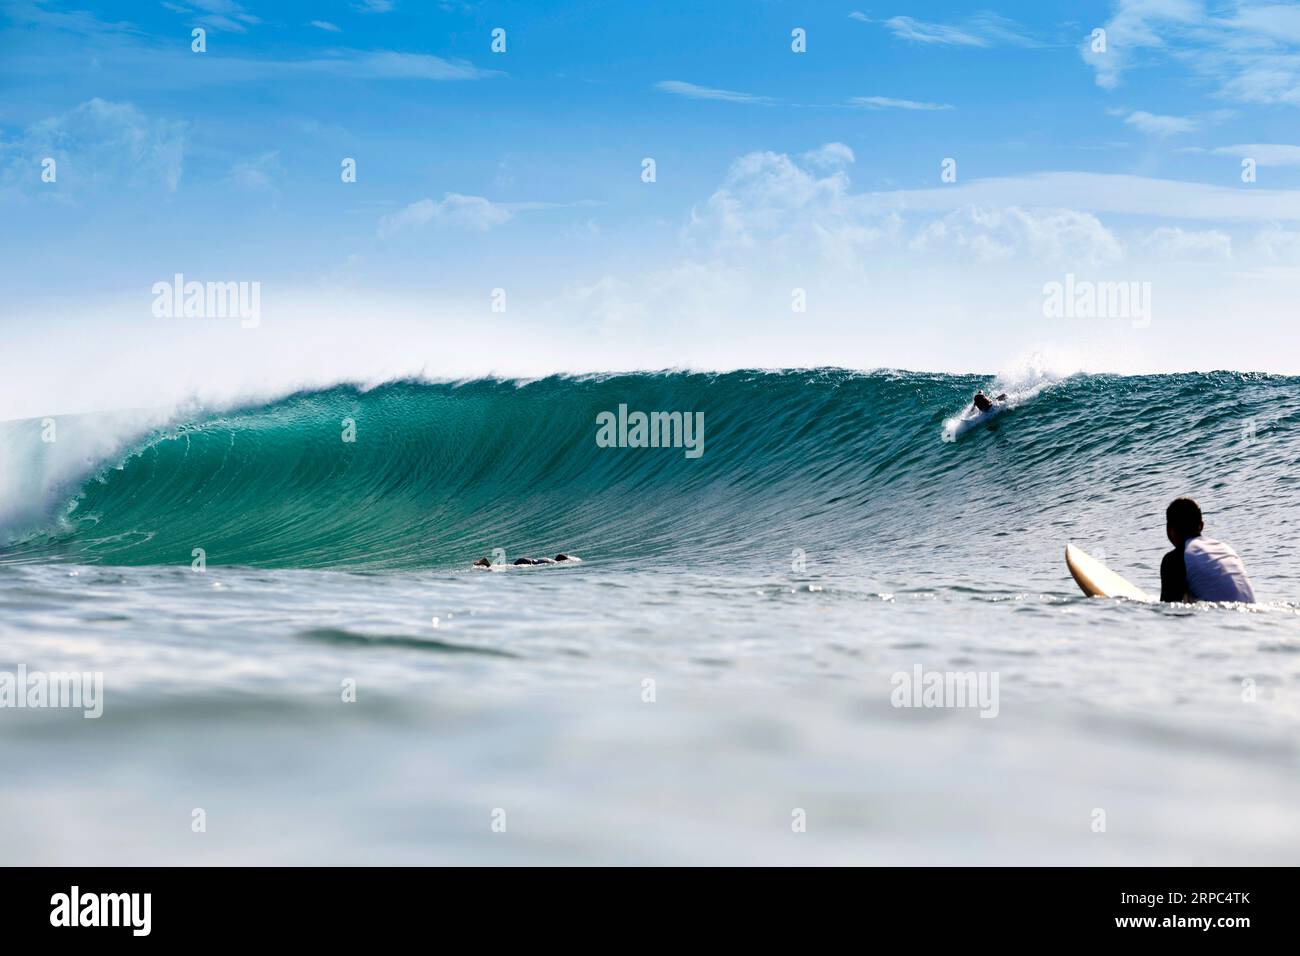 A Surfer looks on as another surfer rides a wave Stock Photo